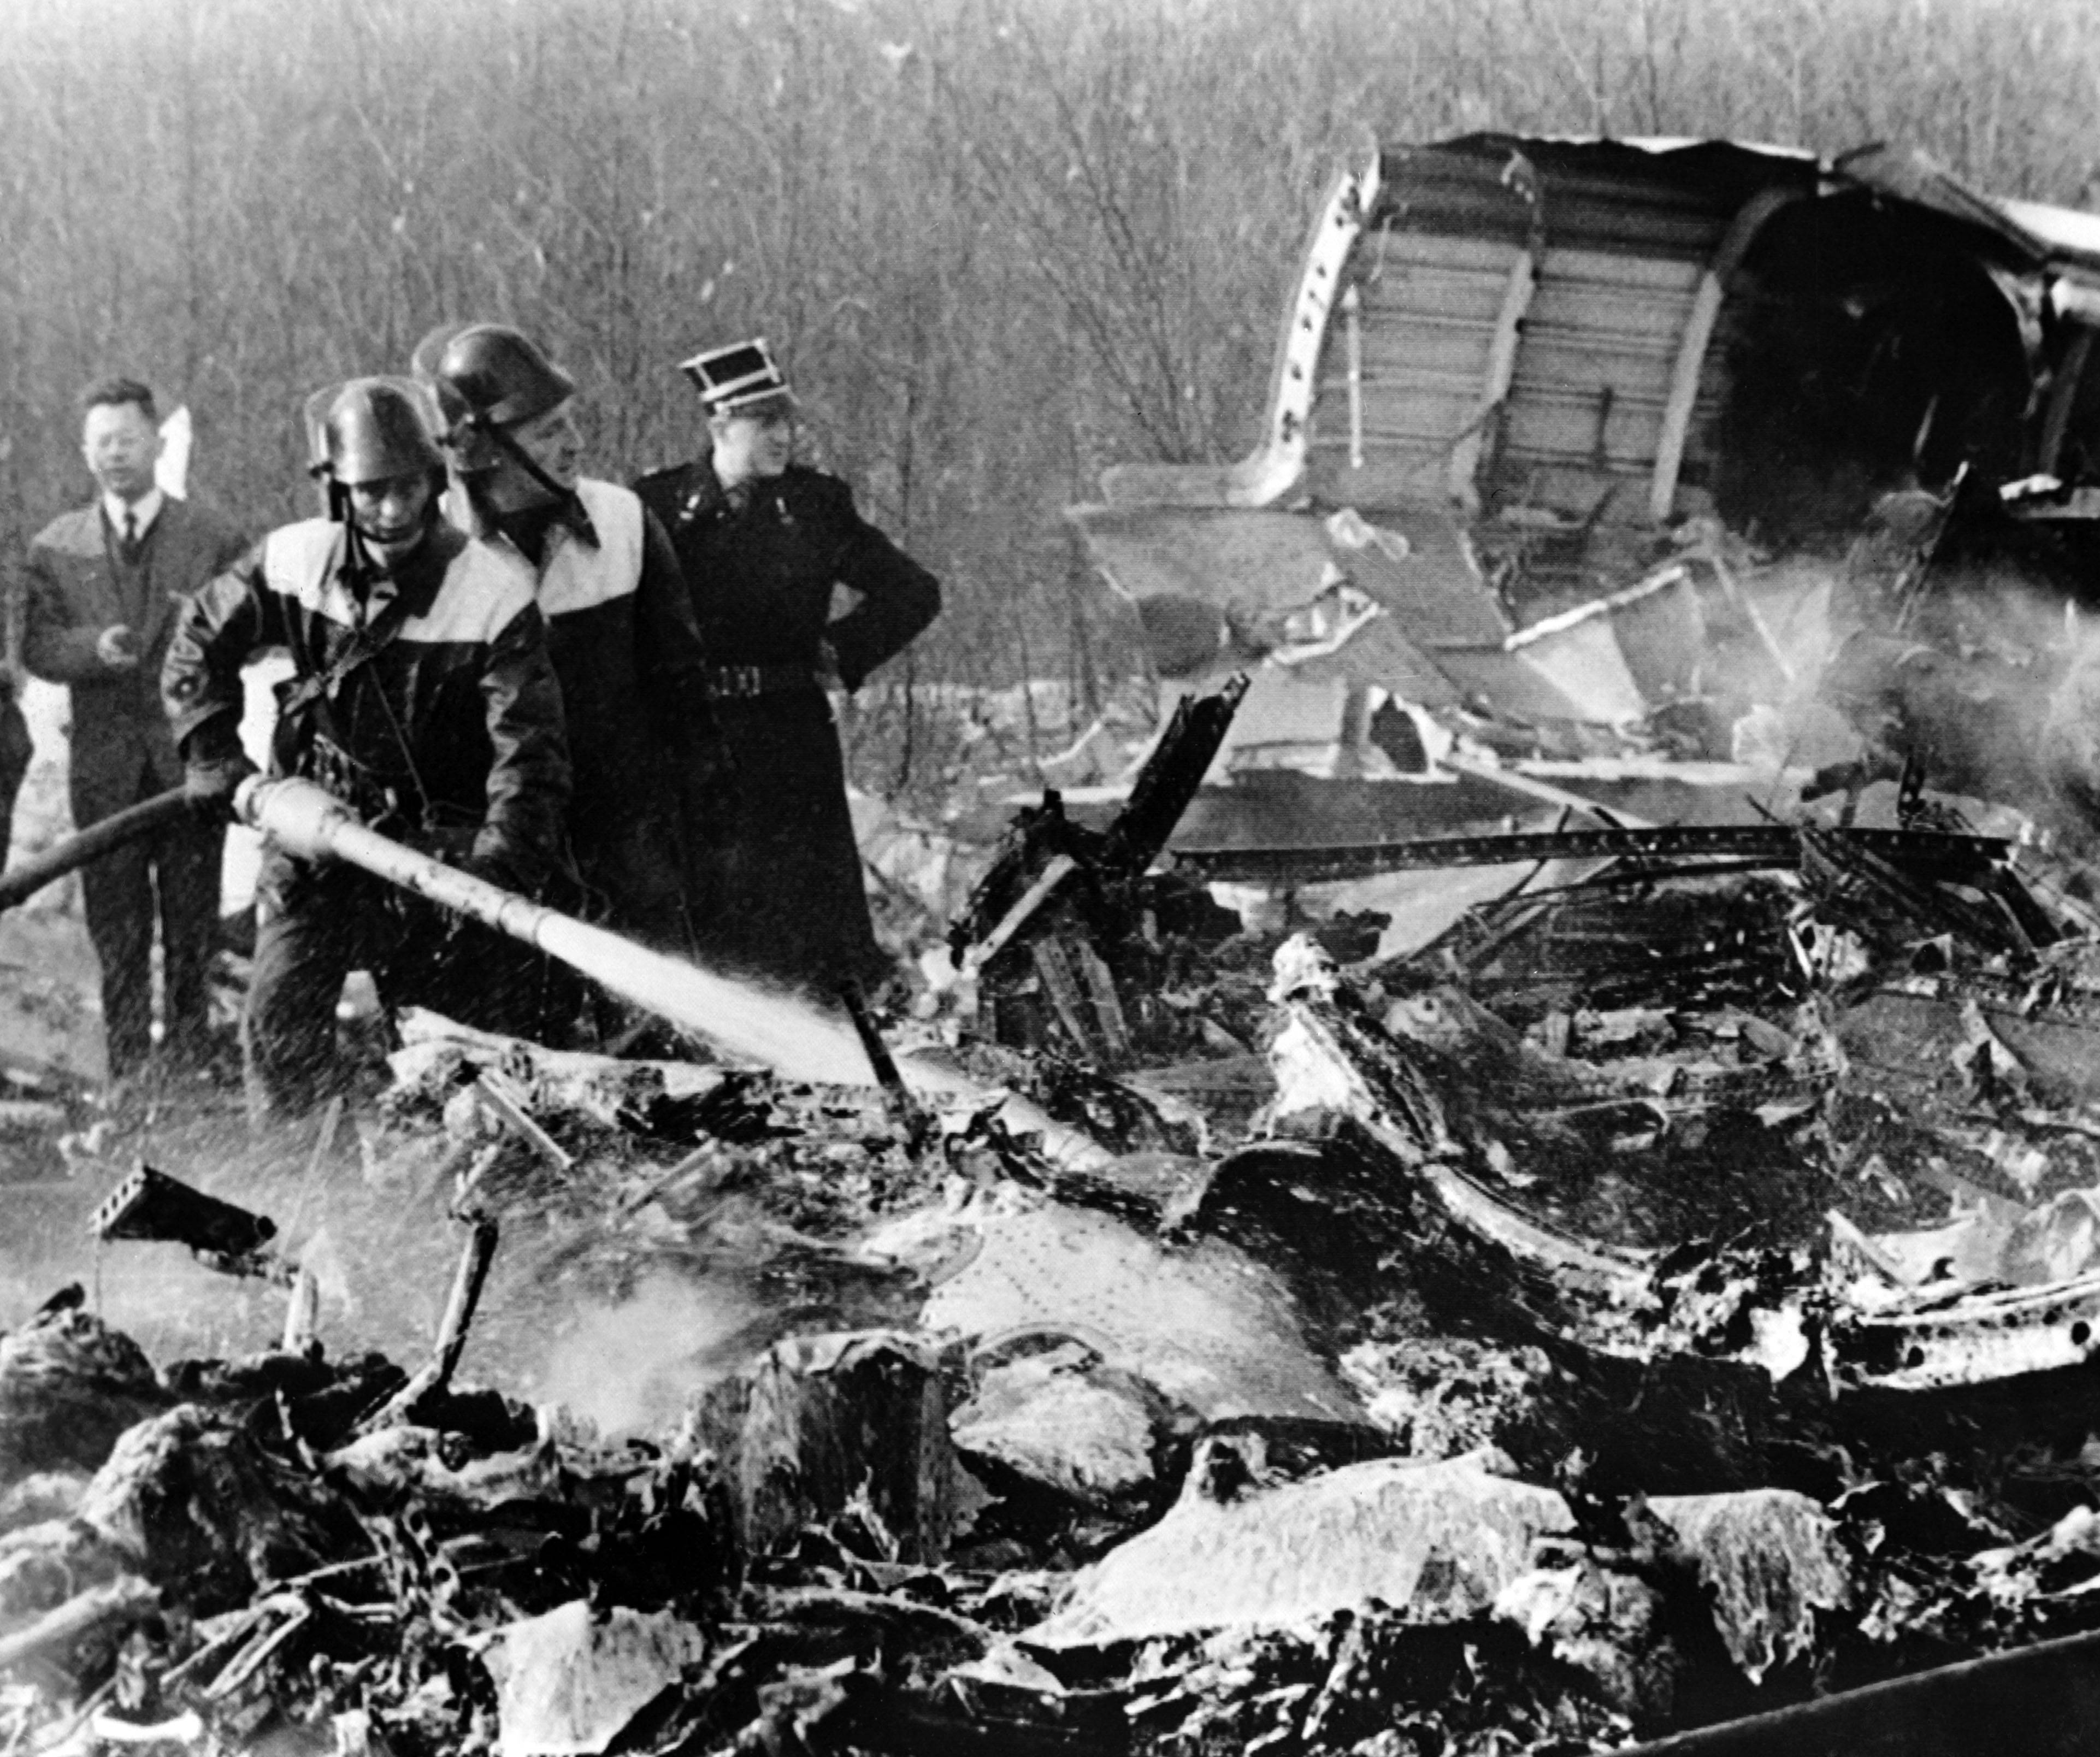 View of the scene of the plane crash of the Sabena Flight 548, on February 15, 1961 near Brussels. (STF/AFP/Getty Images)